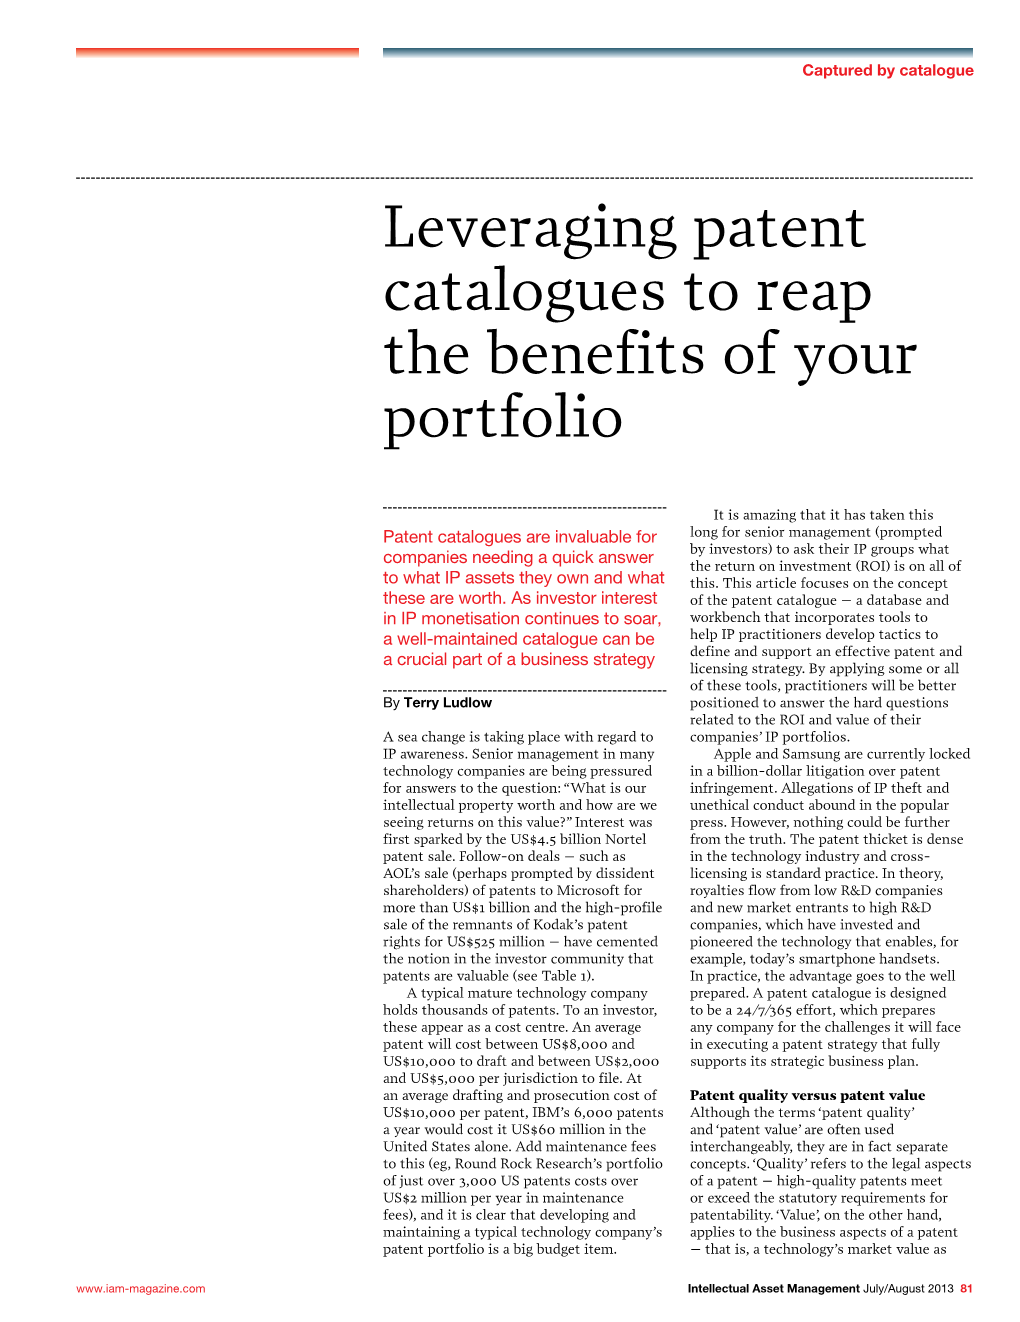 Leveraging Patent Catalogues to Reap the Benefits of Your Portfolio